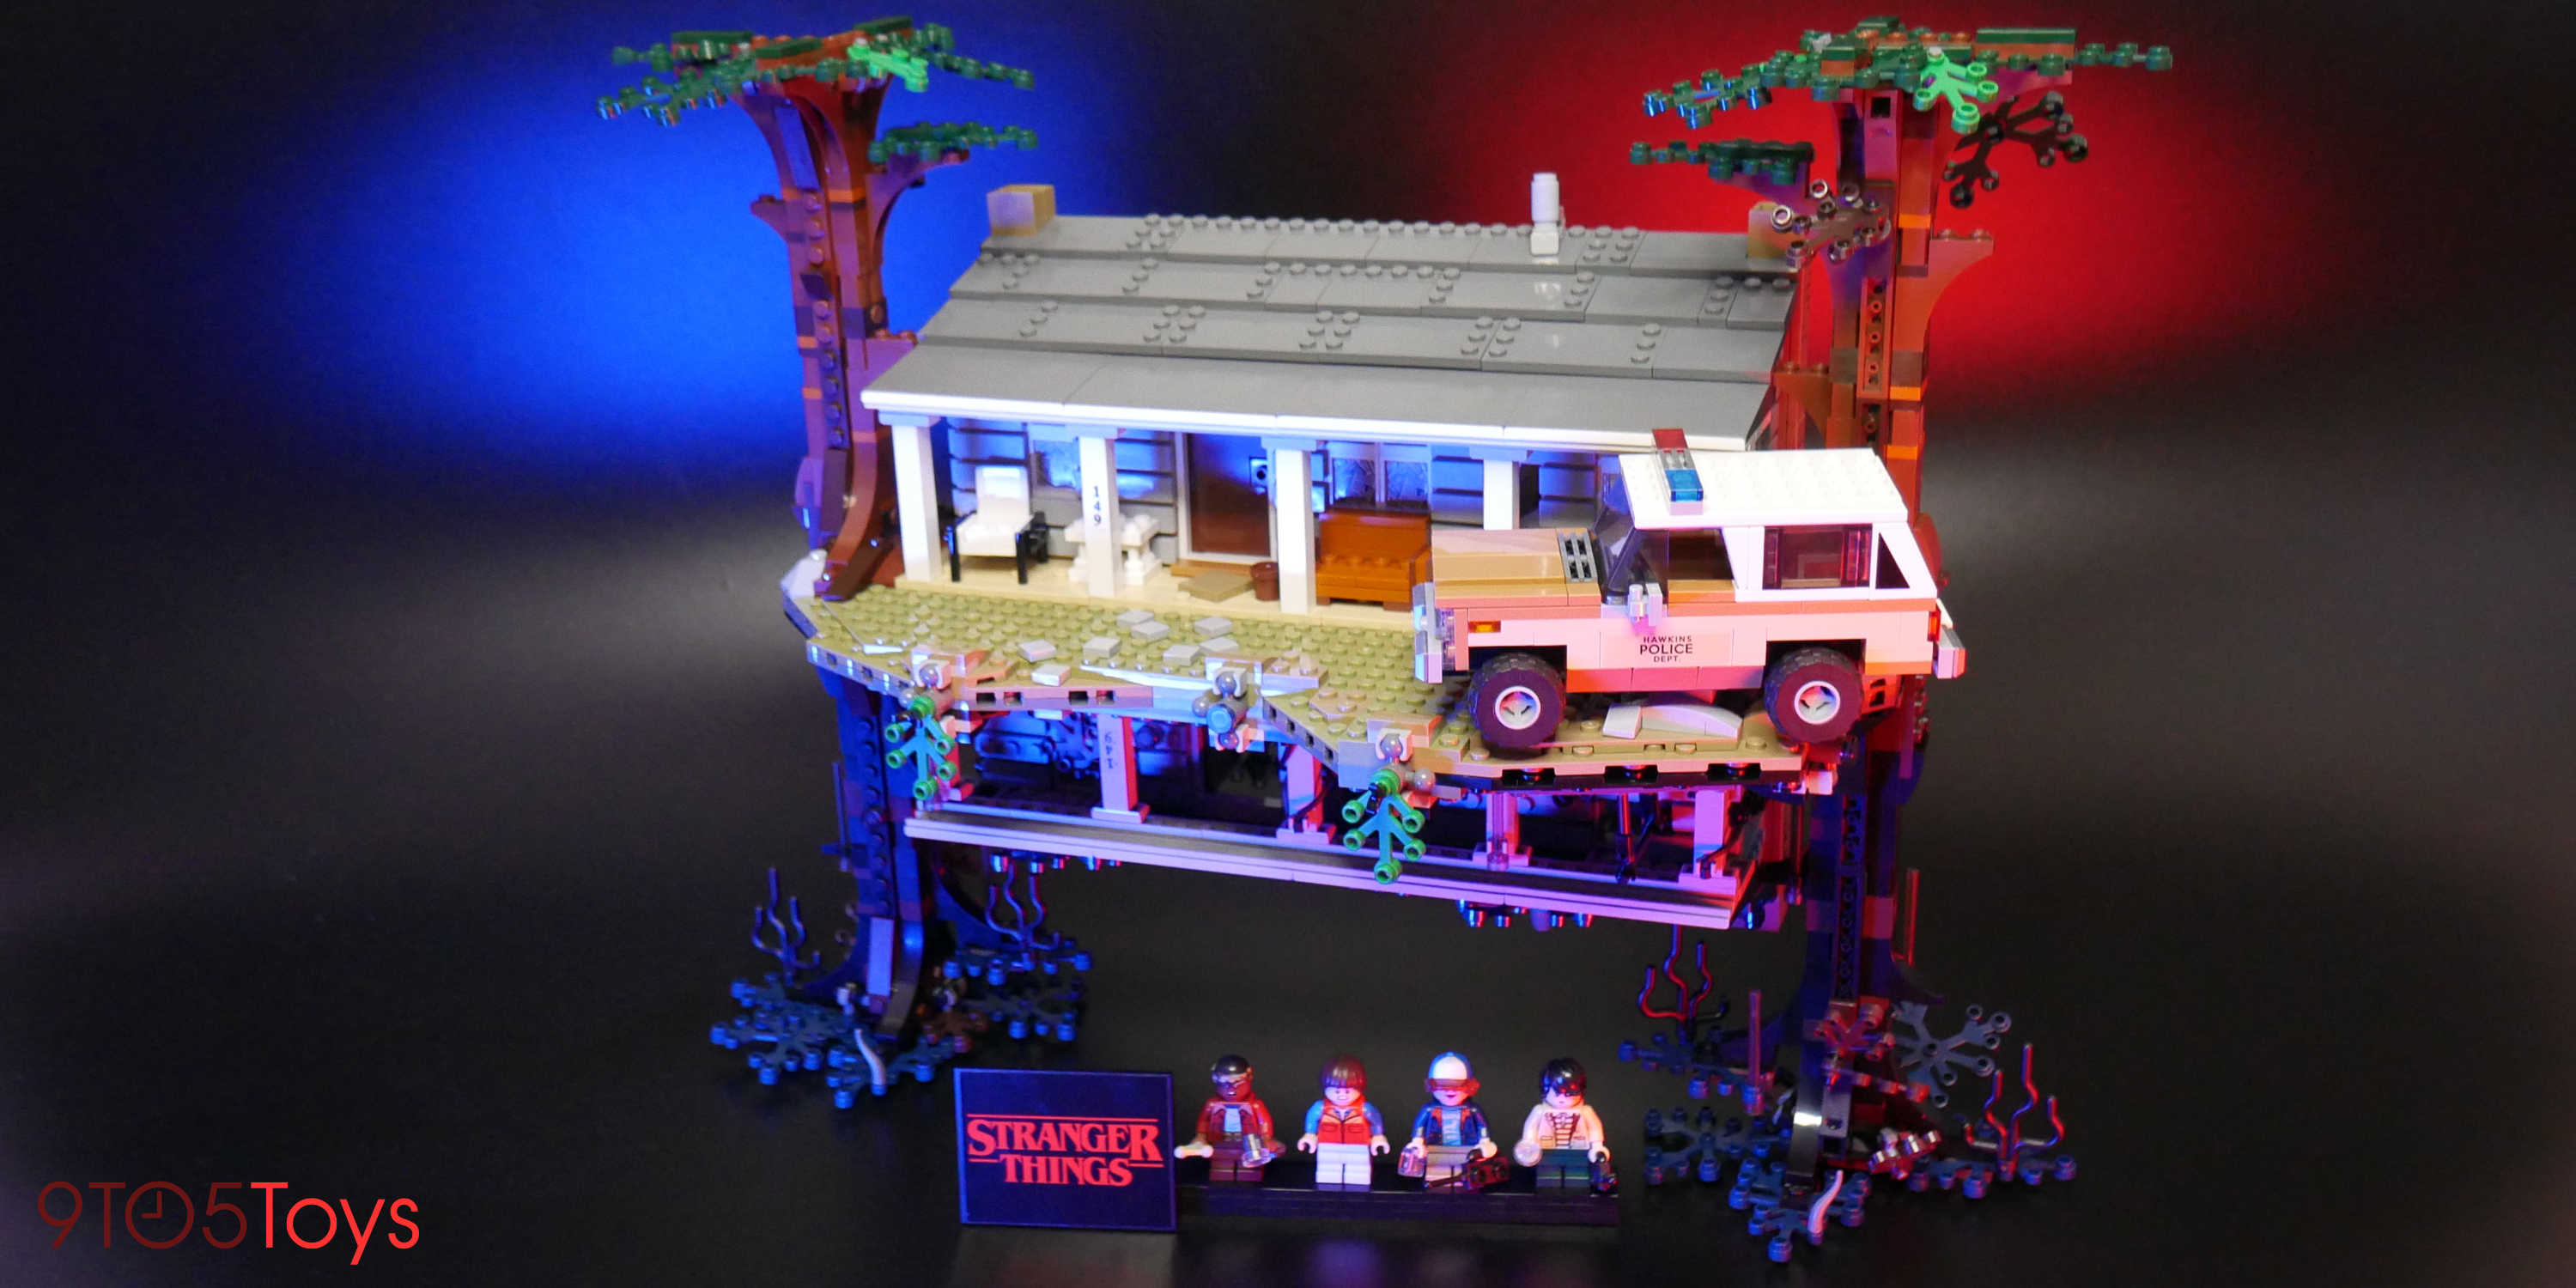 LEGO Stranger Things Review: a perfectly-executed licensed set 9to5Toys